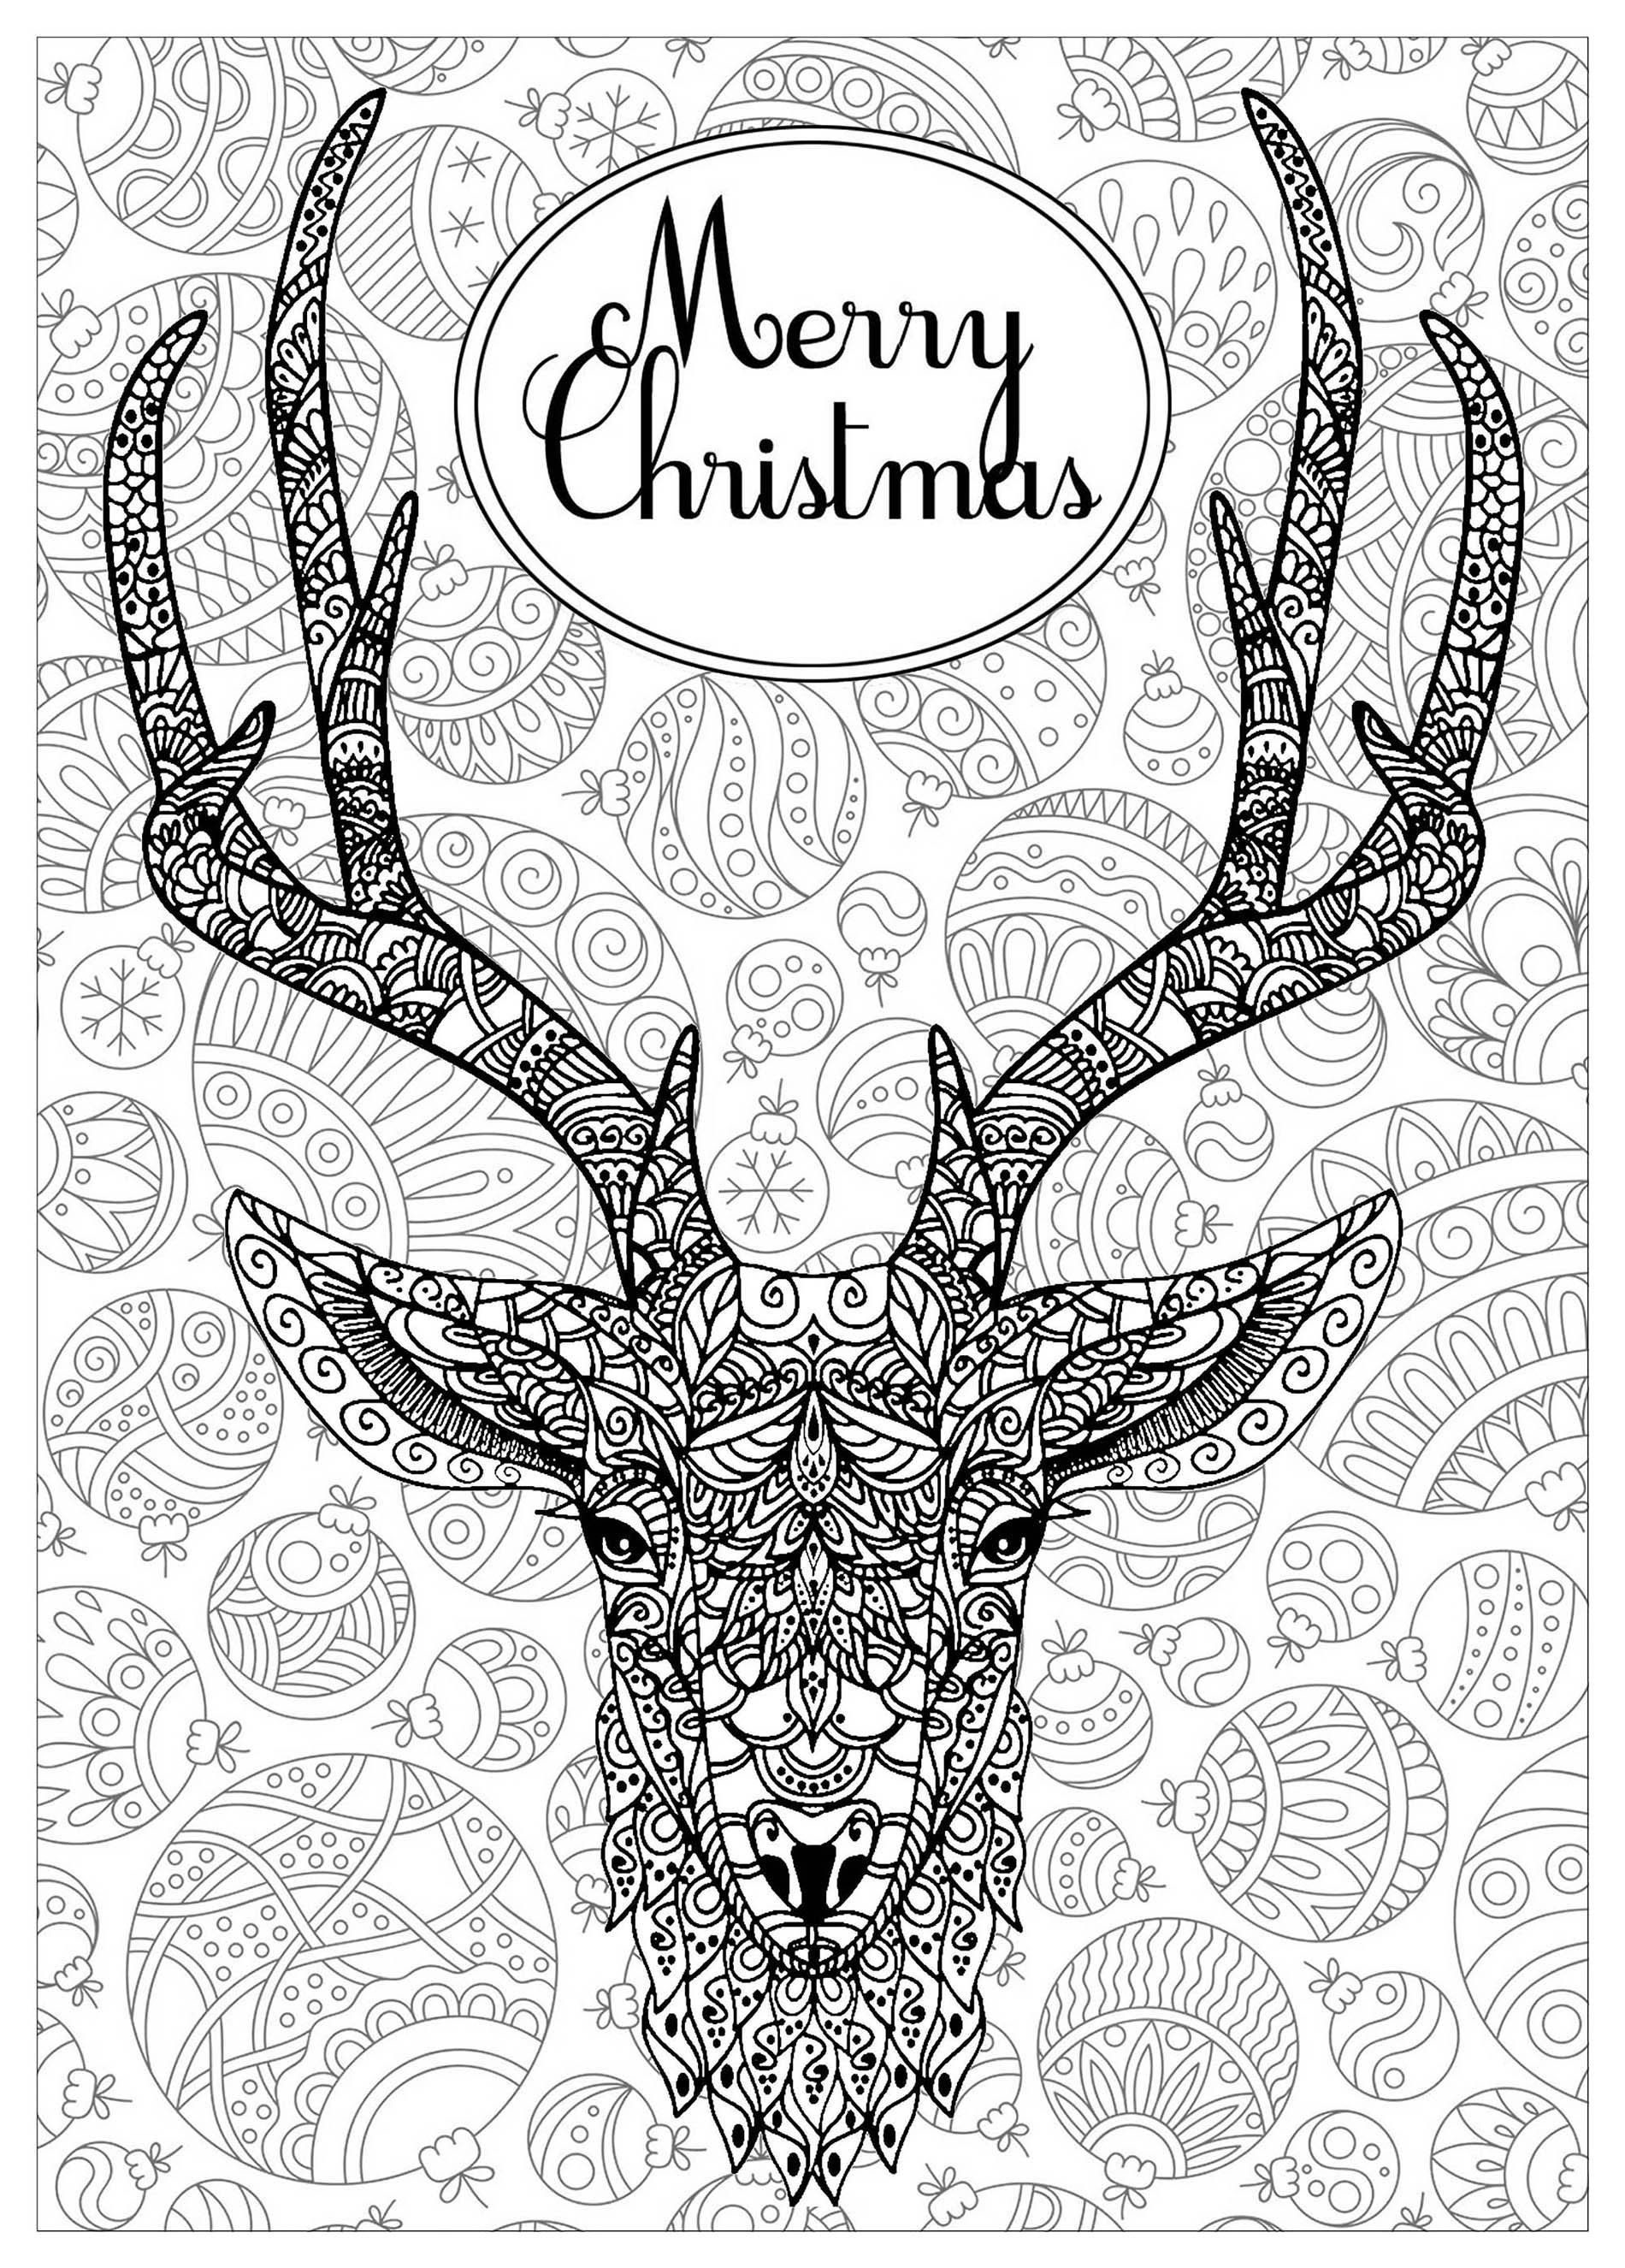 Download Deer with text and background | Christmas - Coloring pages ...